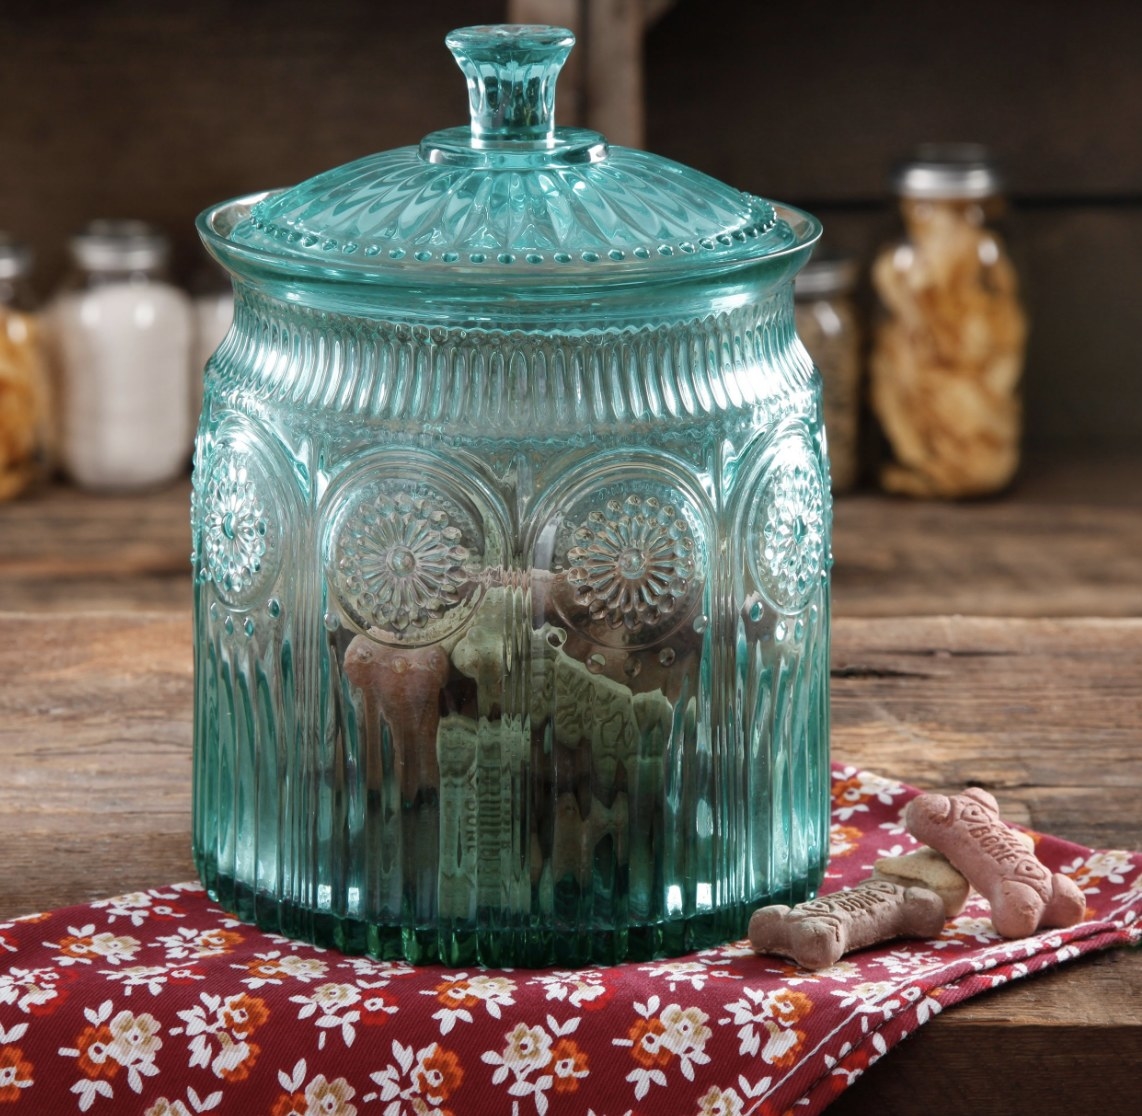 The blue glass jar has ornate detailing and is full of pet treats